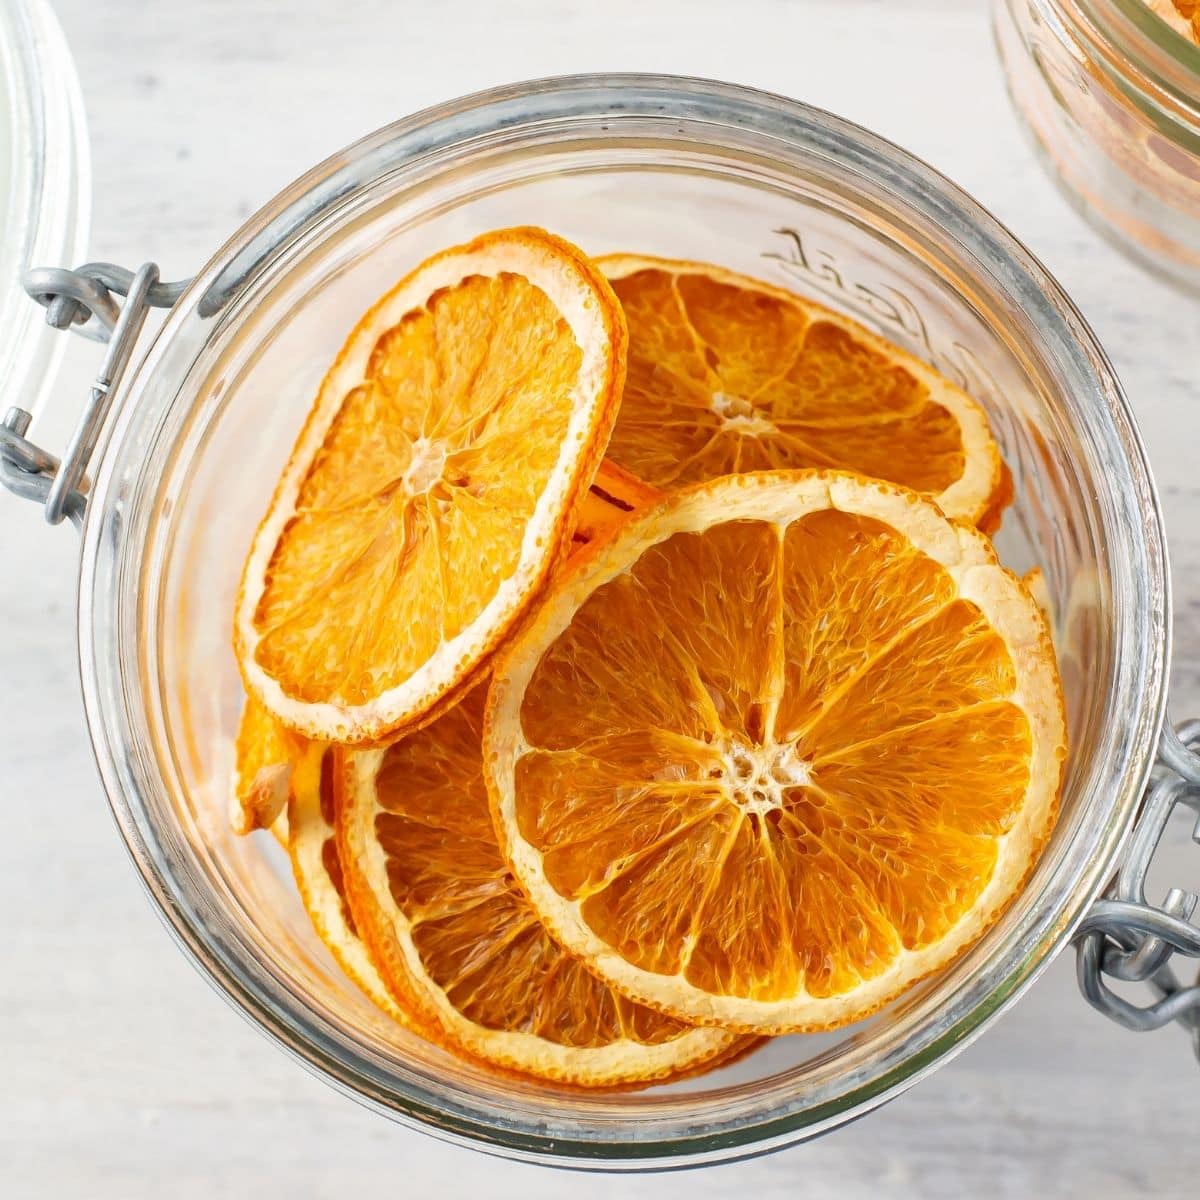 How to Make Dried Orange Slices in the Oven for Decor - Artful Homemaking